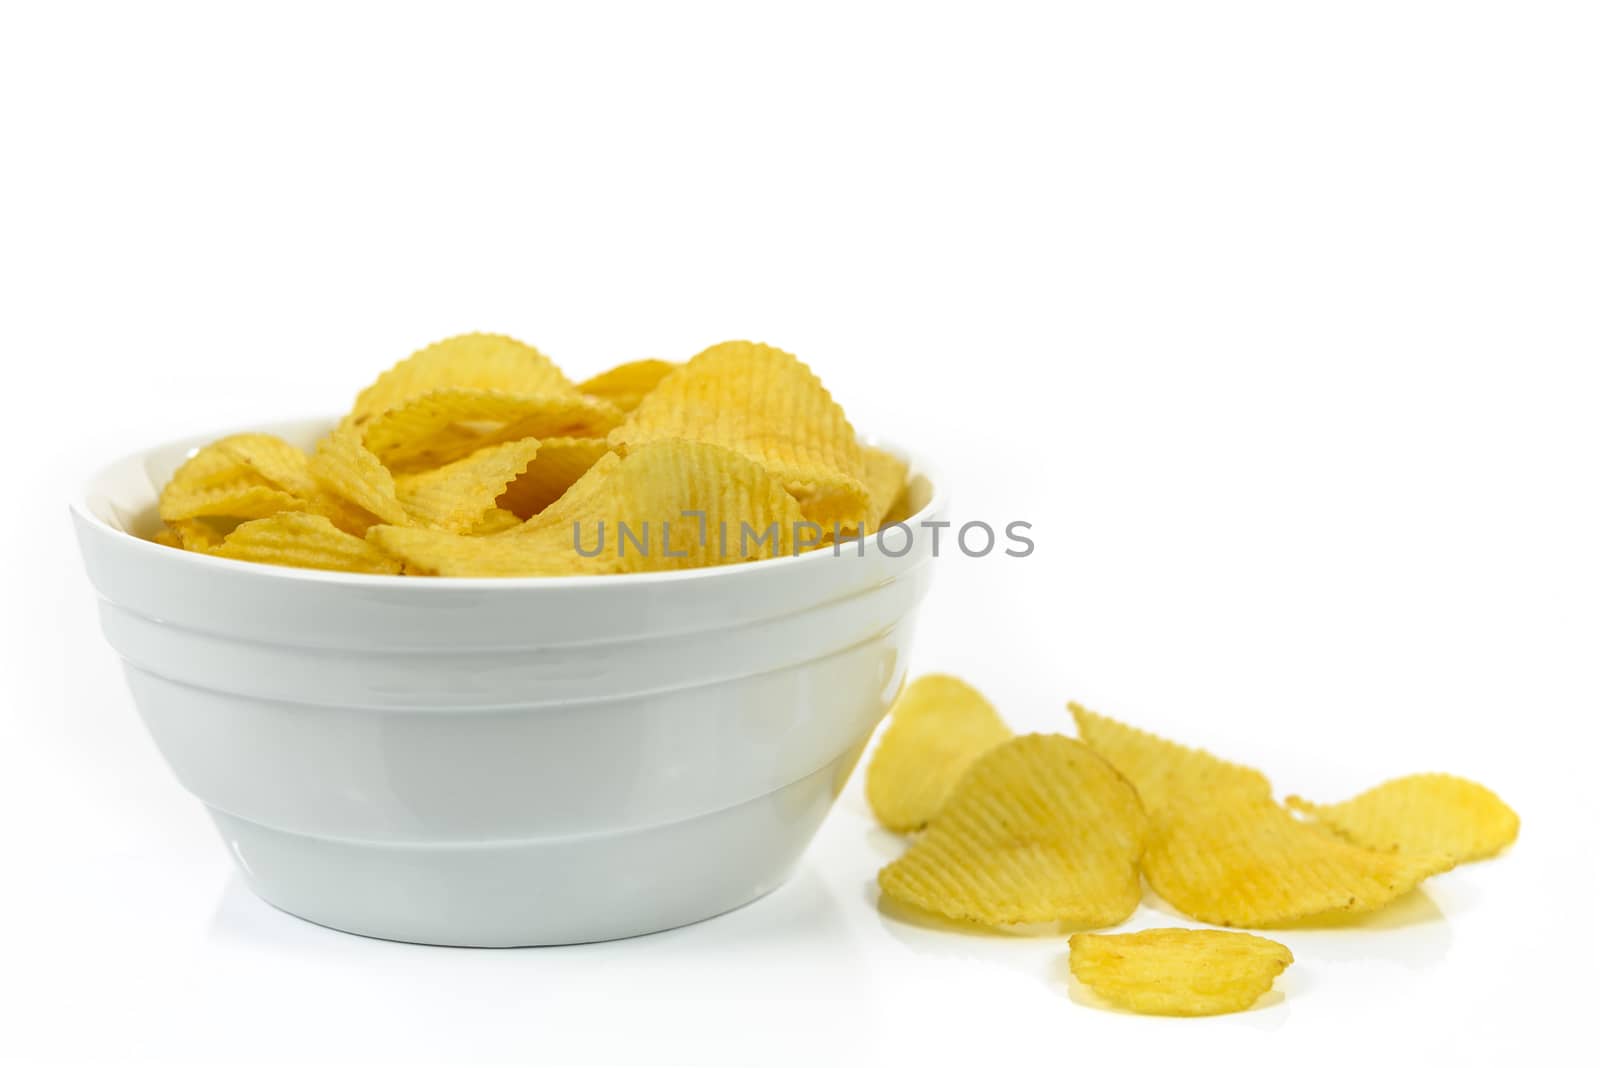 Crispy potato chips in a bowl isolated on a white background.